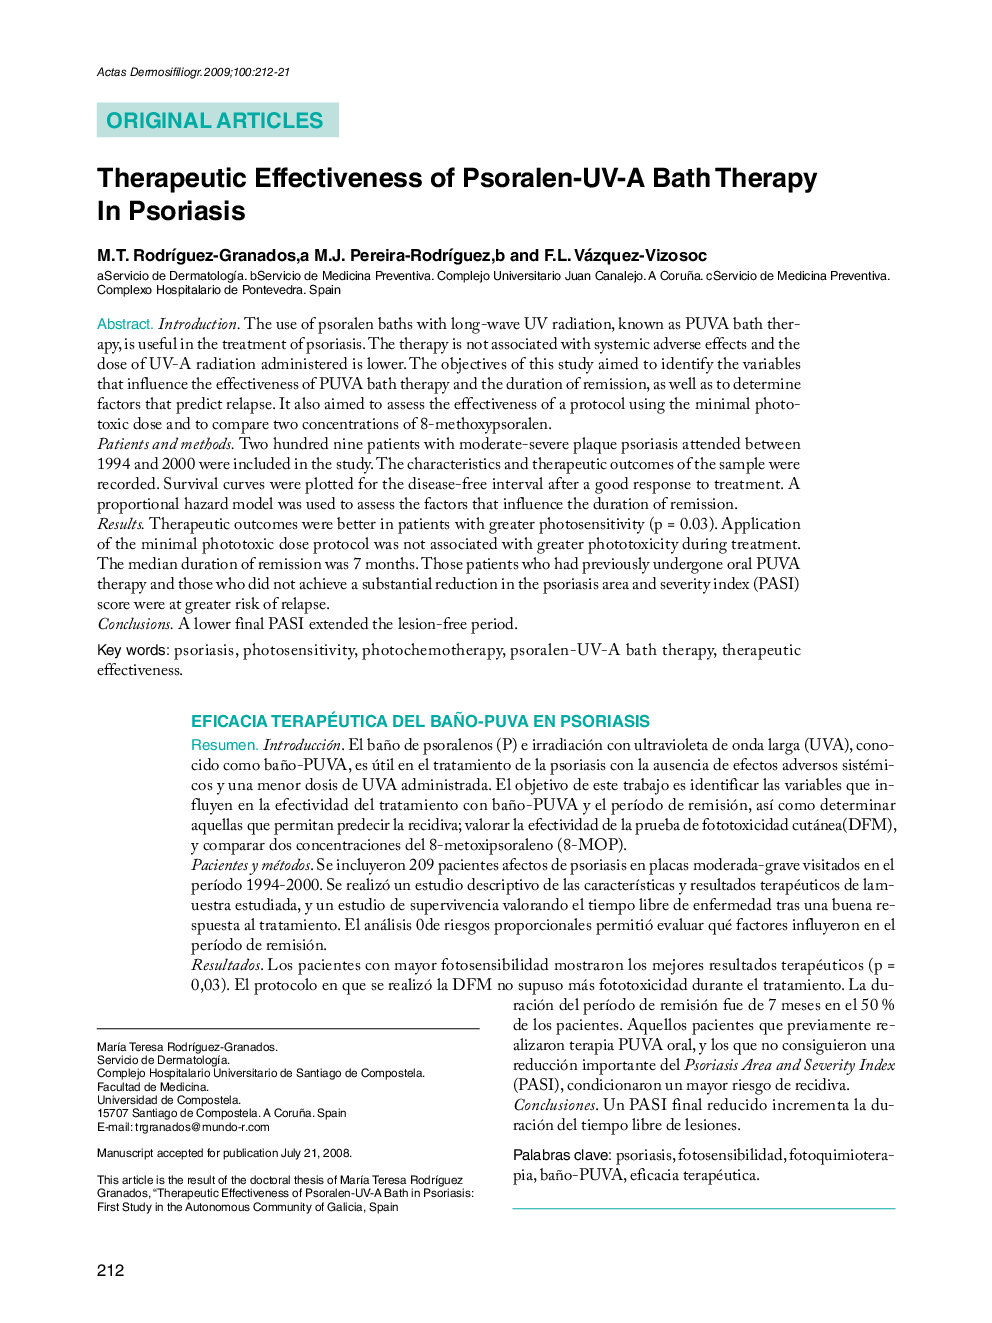 Therapeutic Effectiveness of Psoralen-U V-A Bath Therapy In Psoriasis 